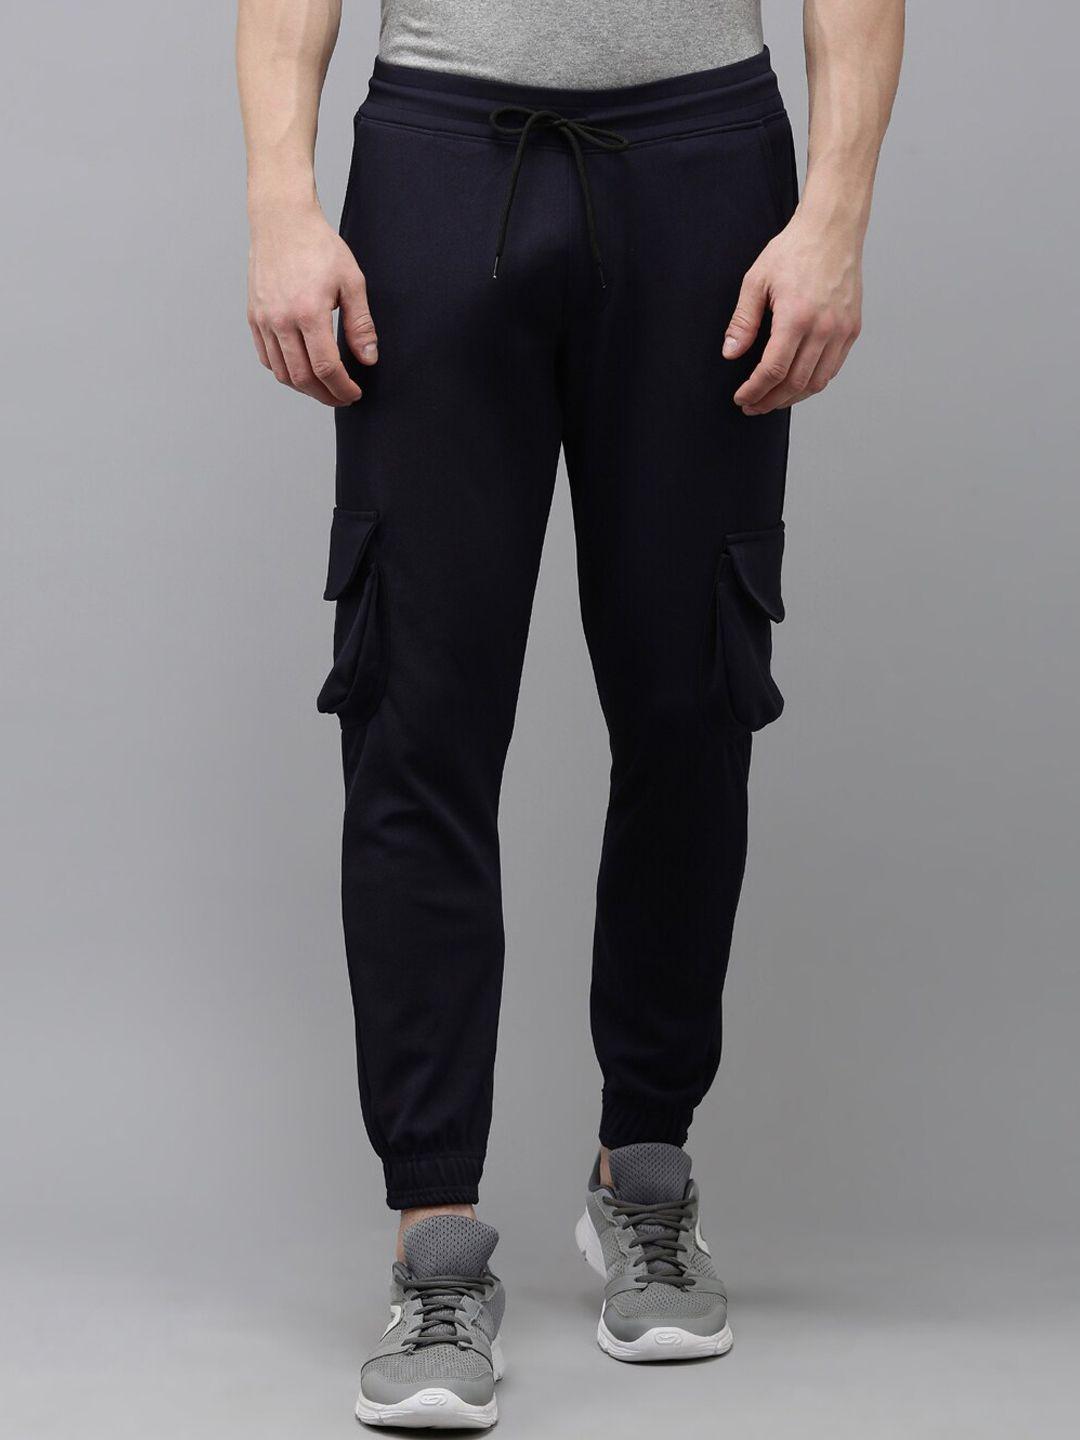 madsto-men-mid-rise-cargo-joggers